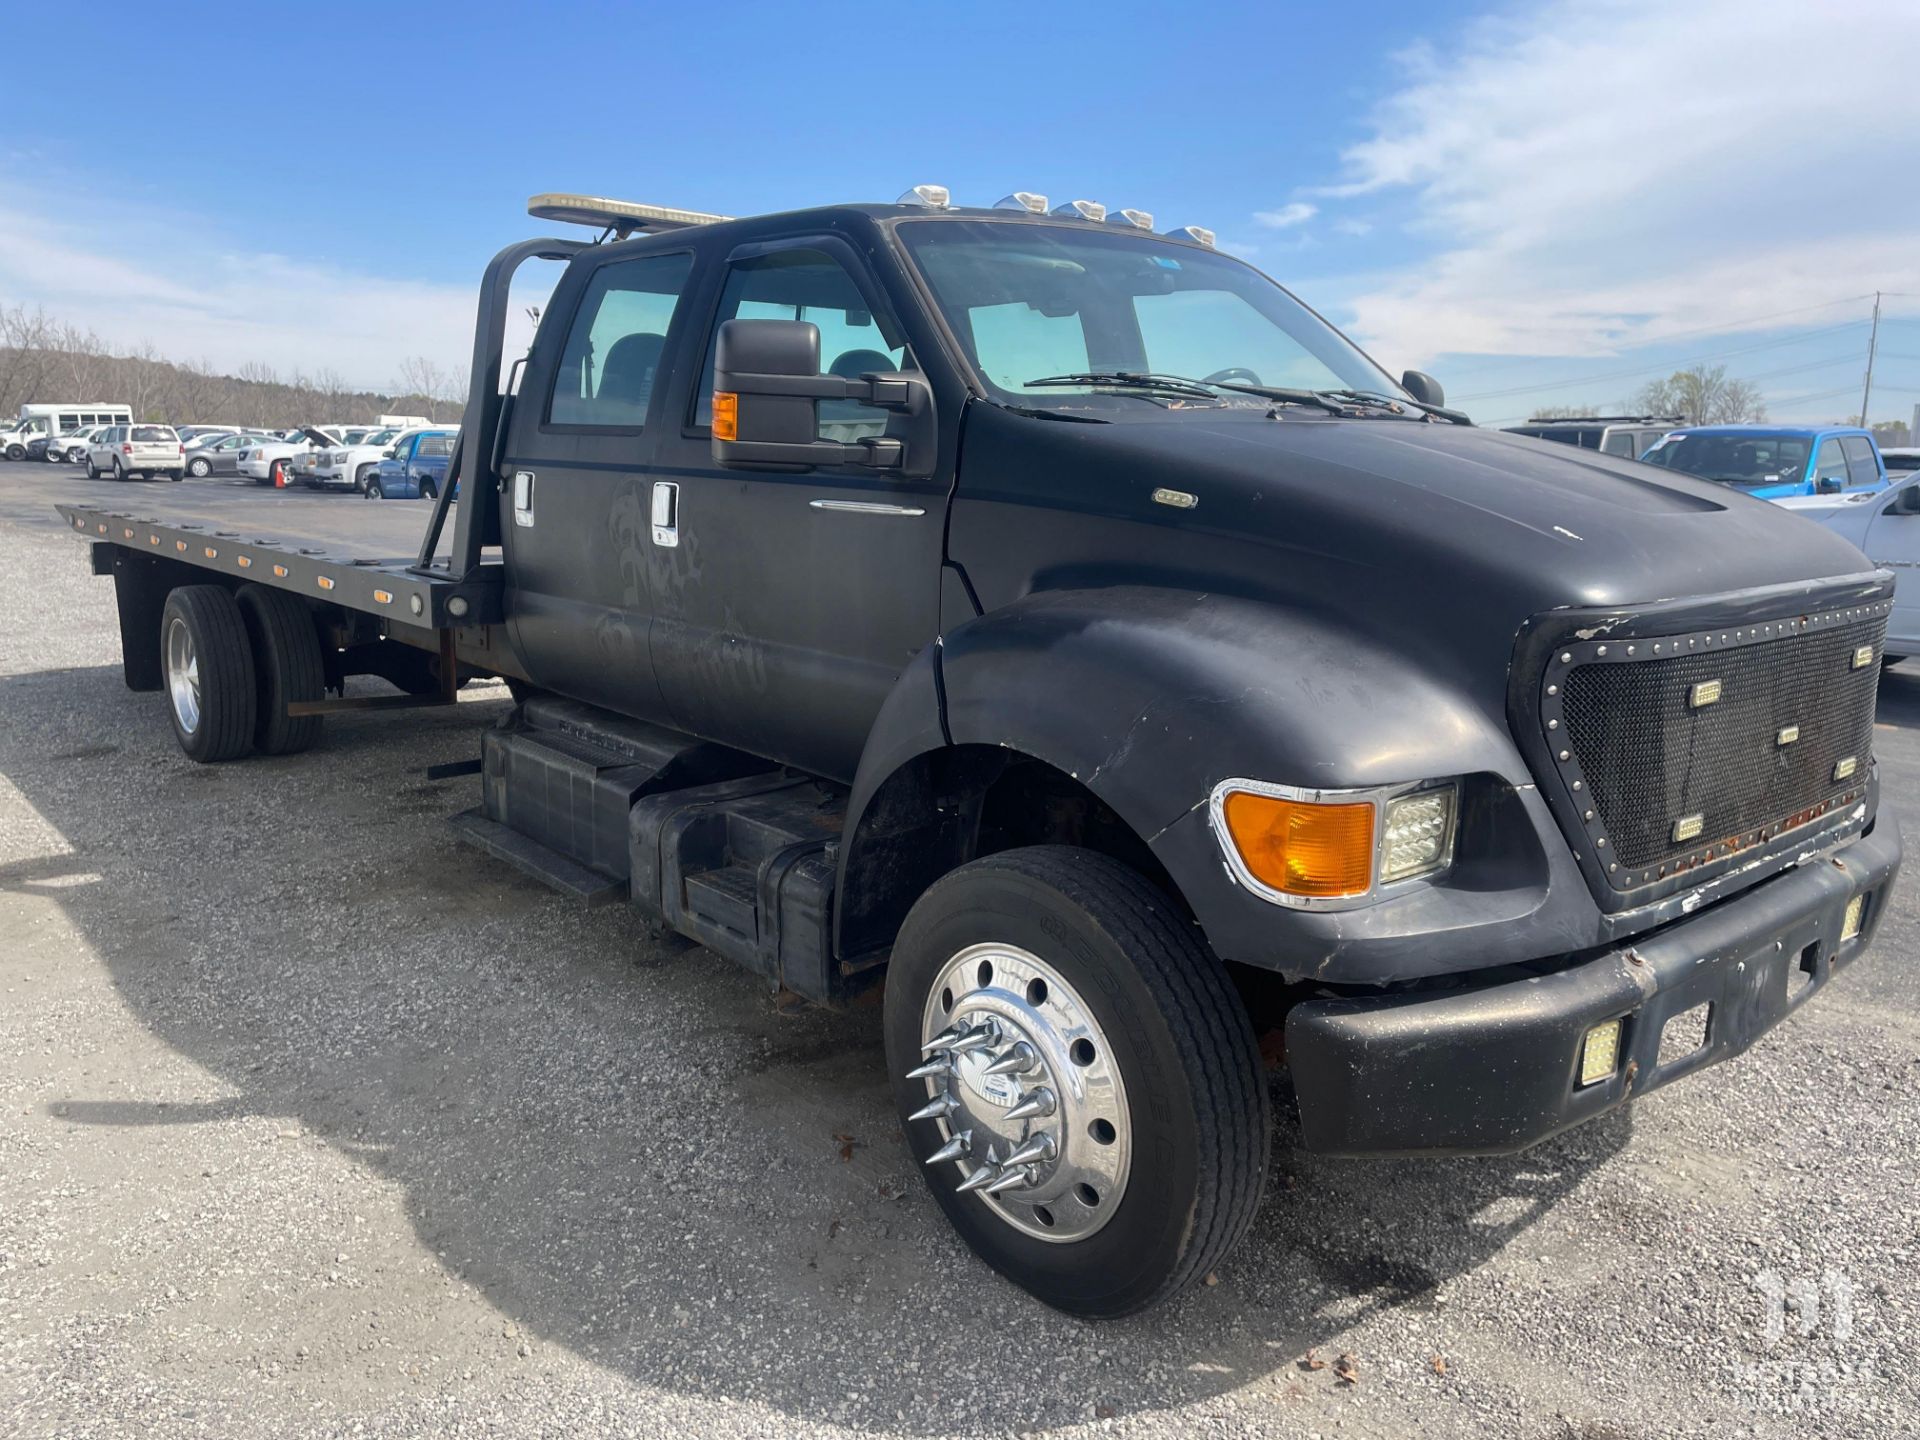 2004 Ford F 650 Rollback Truck - Image 4 of 24